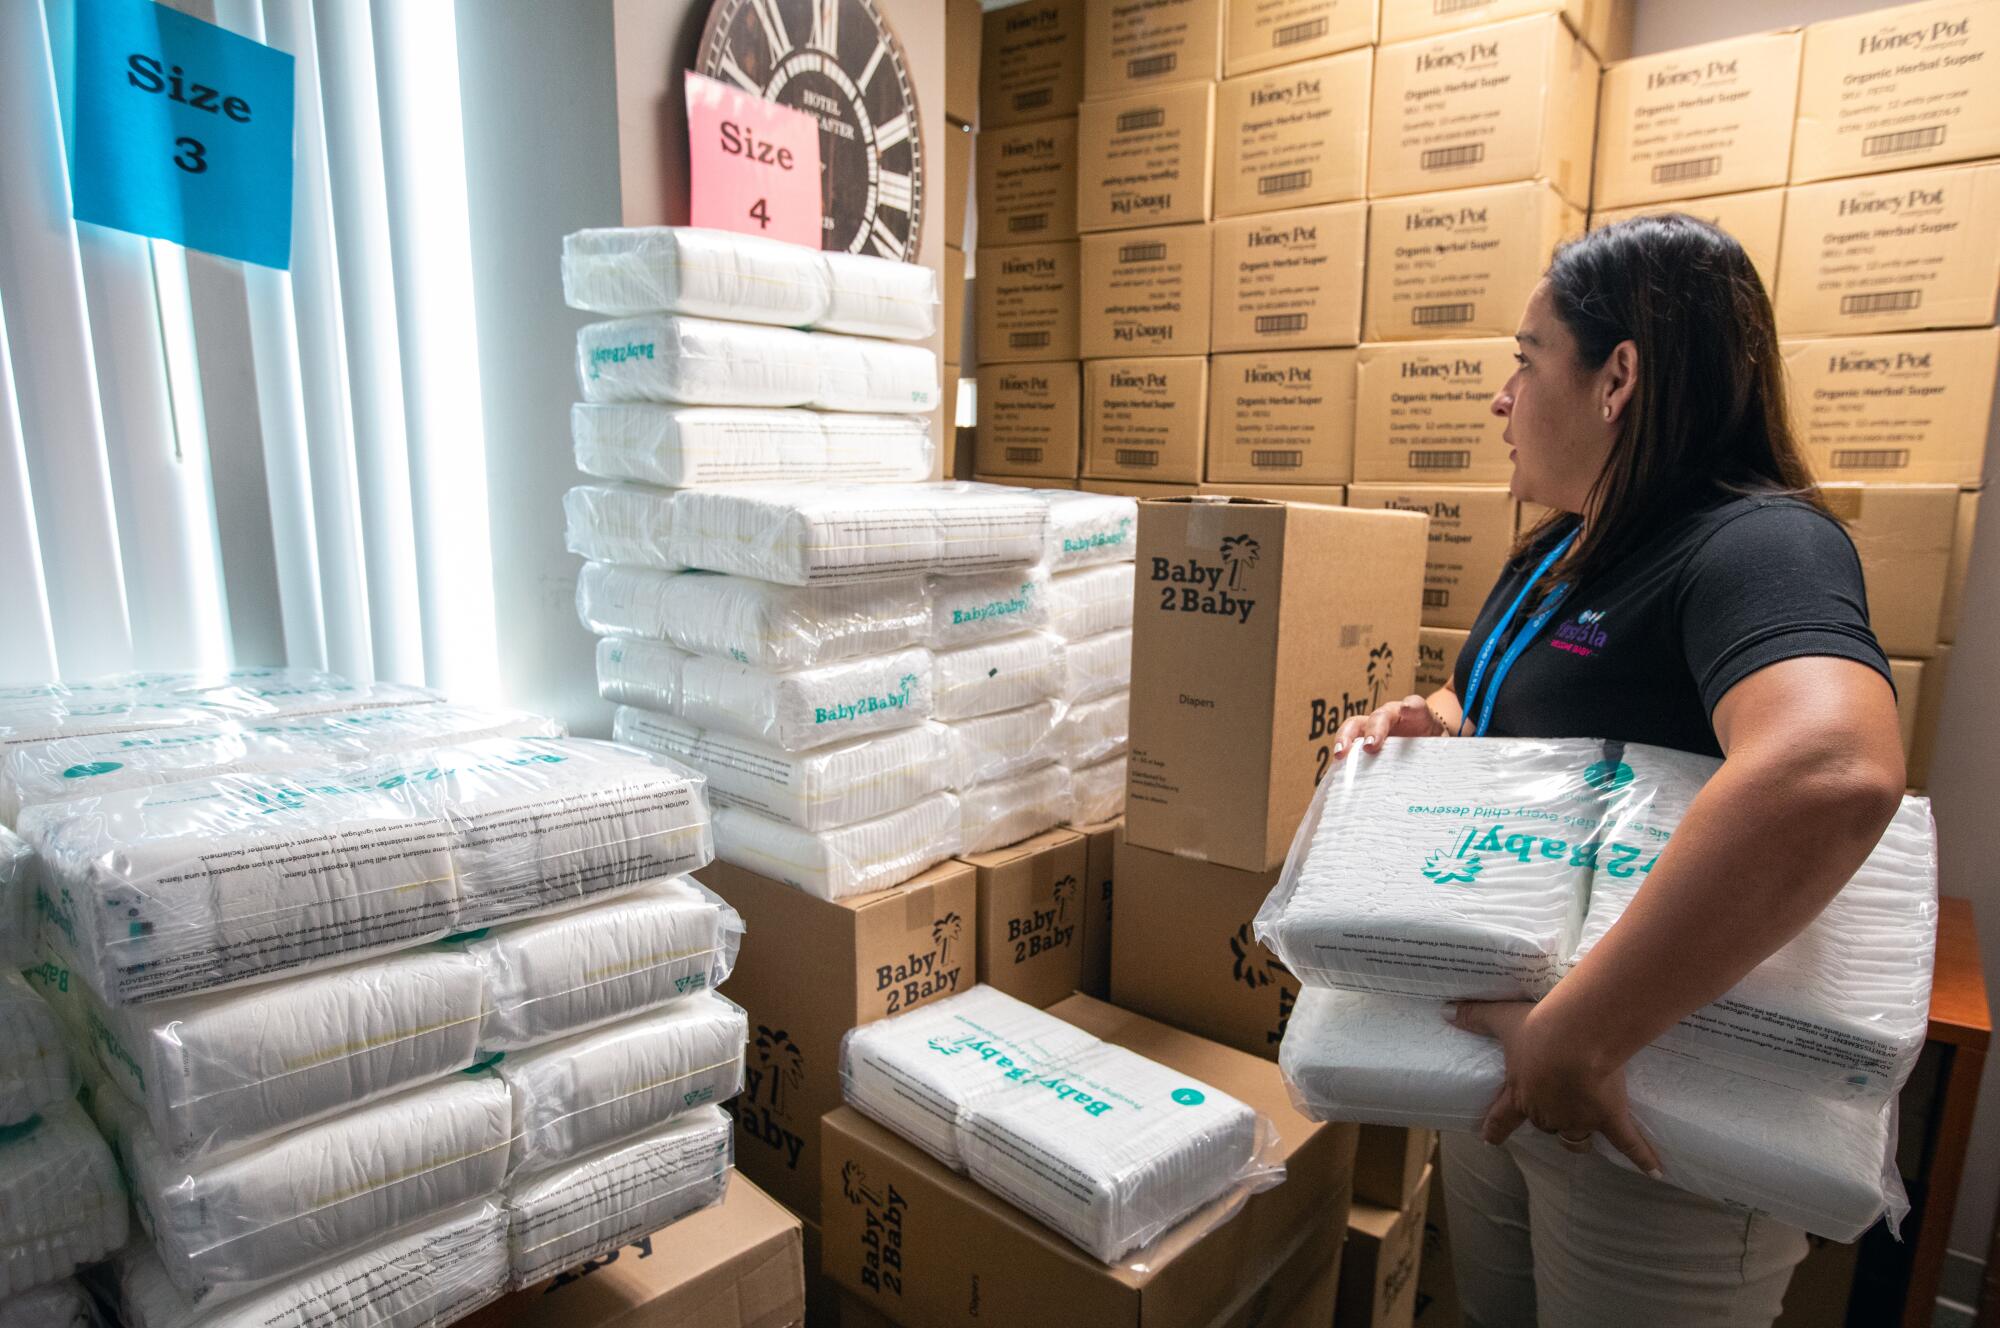 A woman holding white packages looks at stacks of similar packages next to stacked boxes 